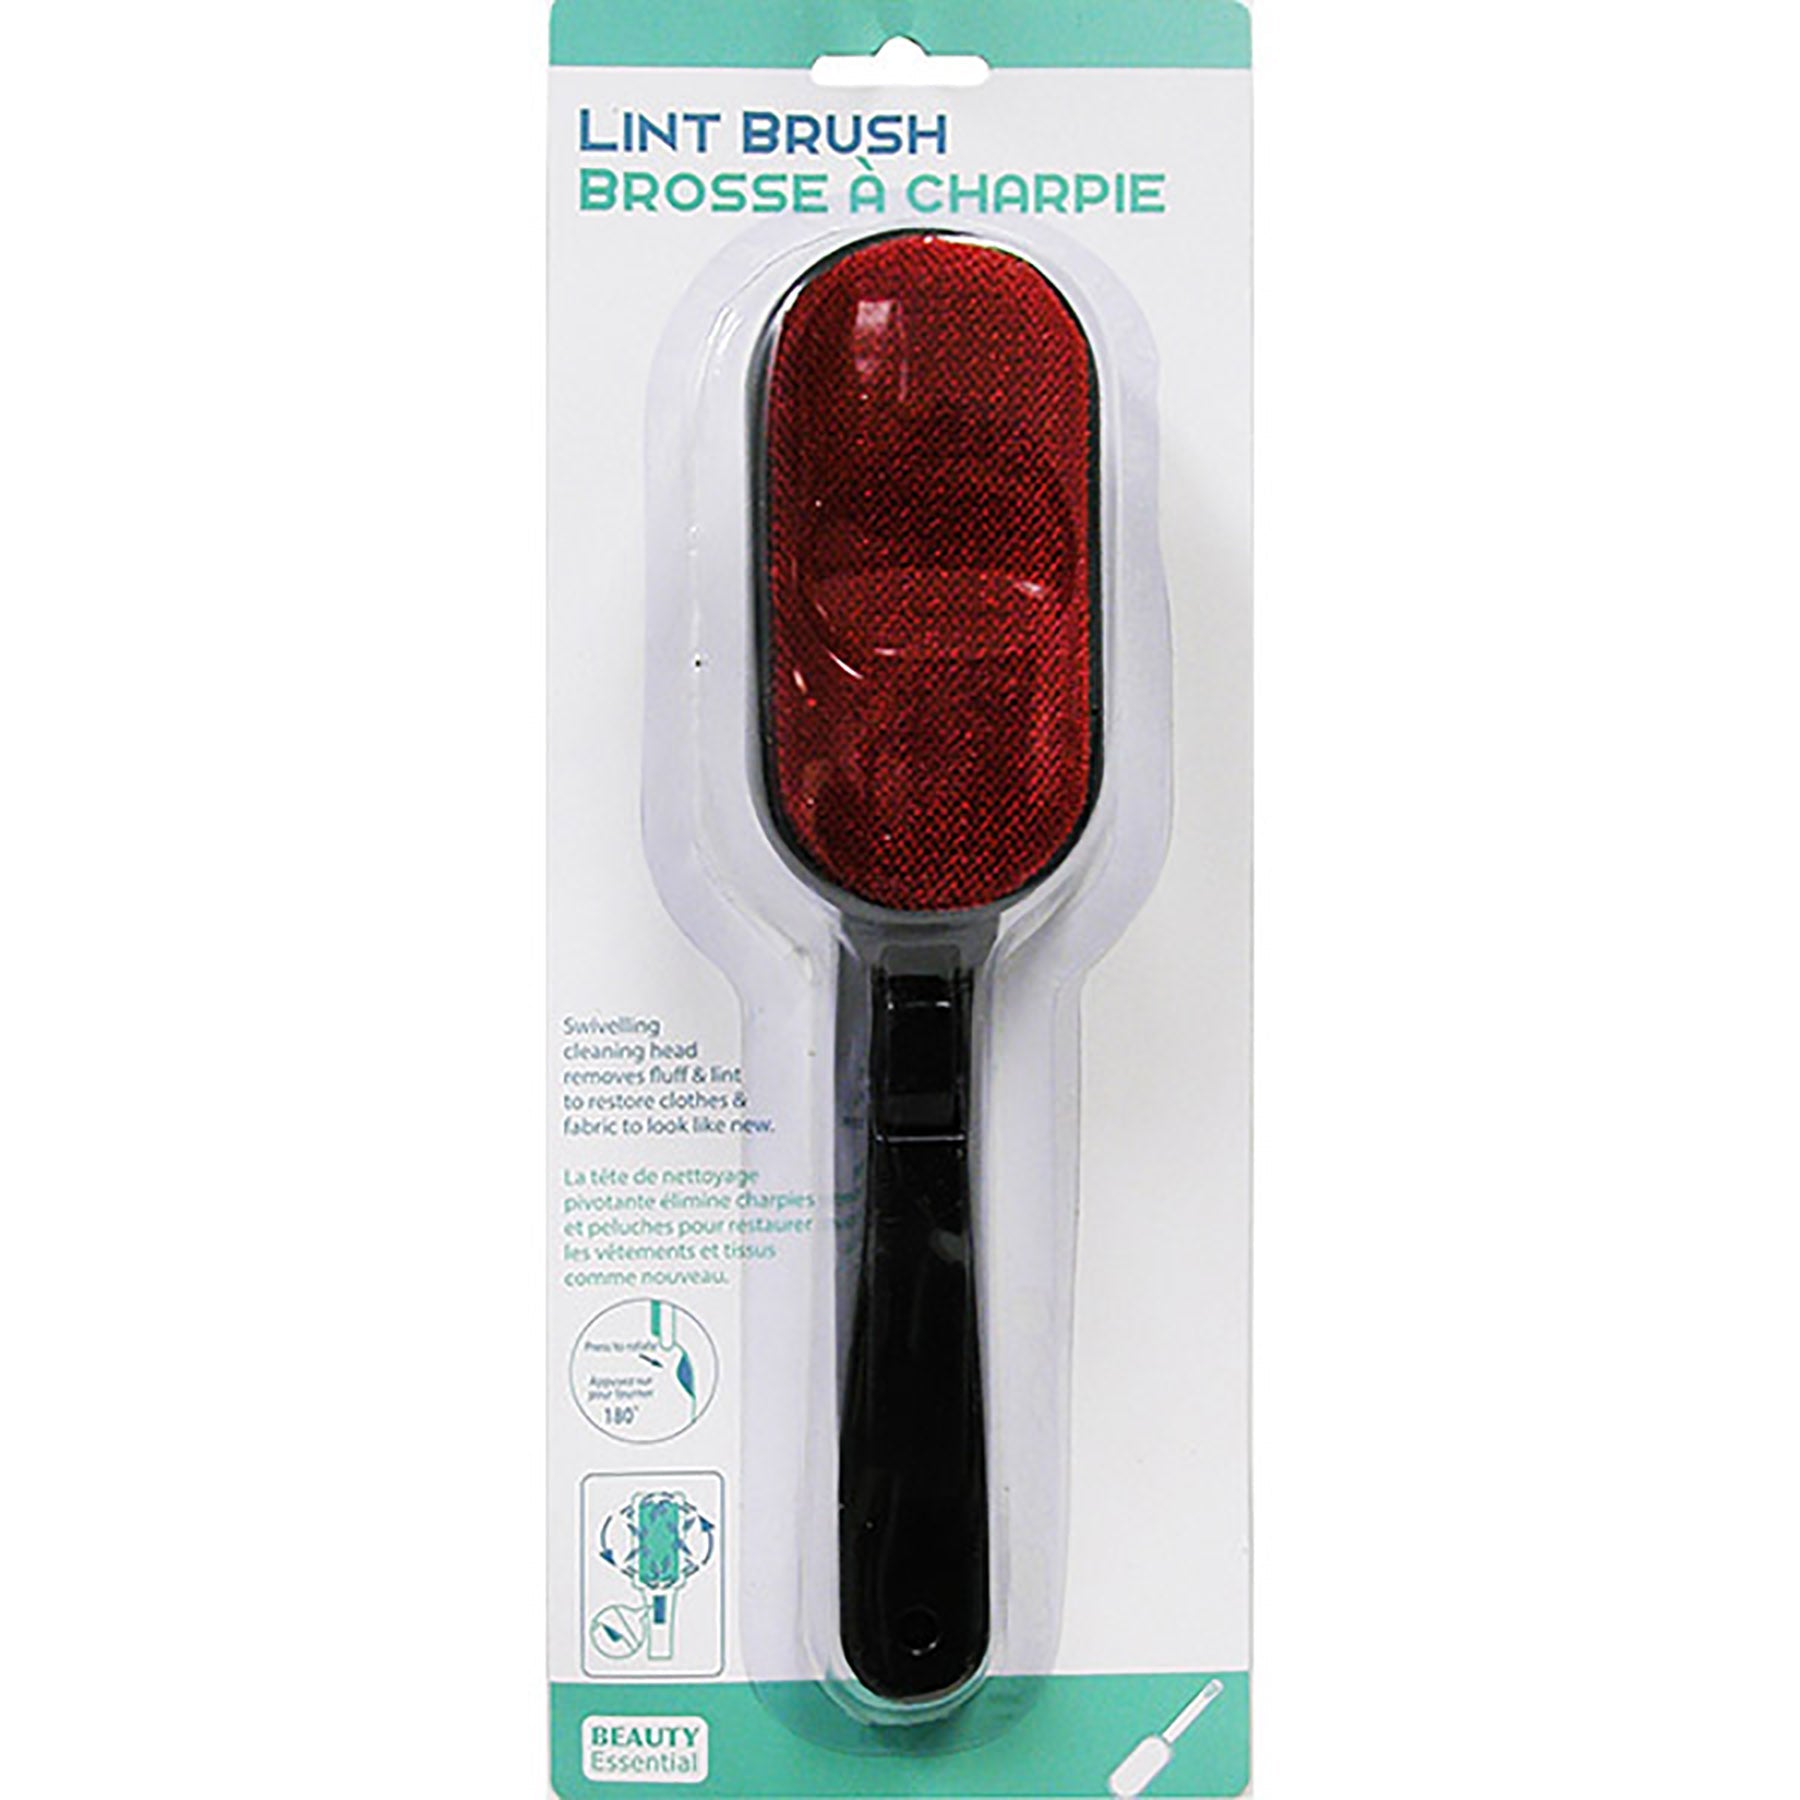 Lint Brush 2 Way Automatic 9.5in